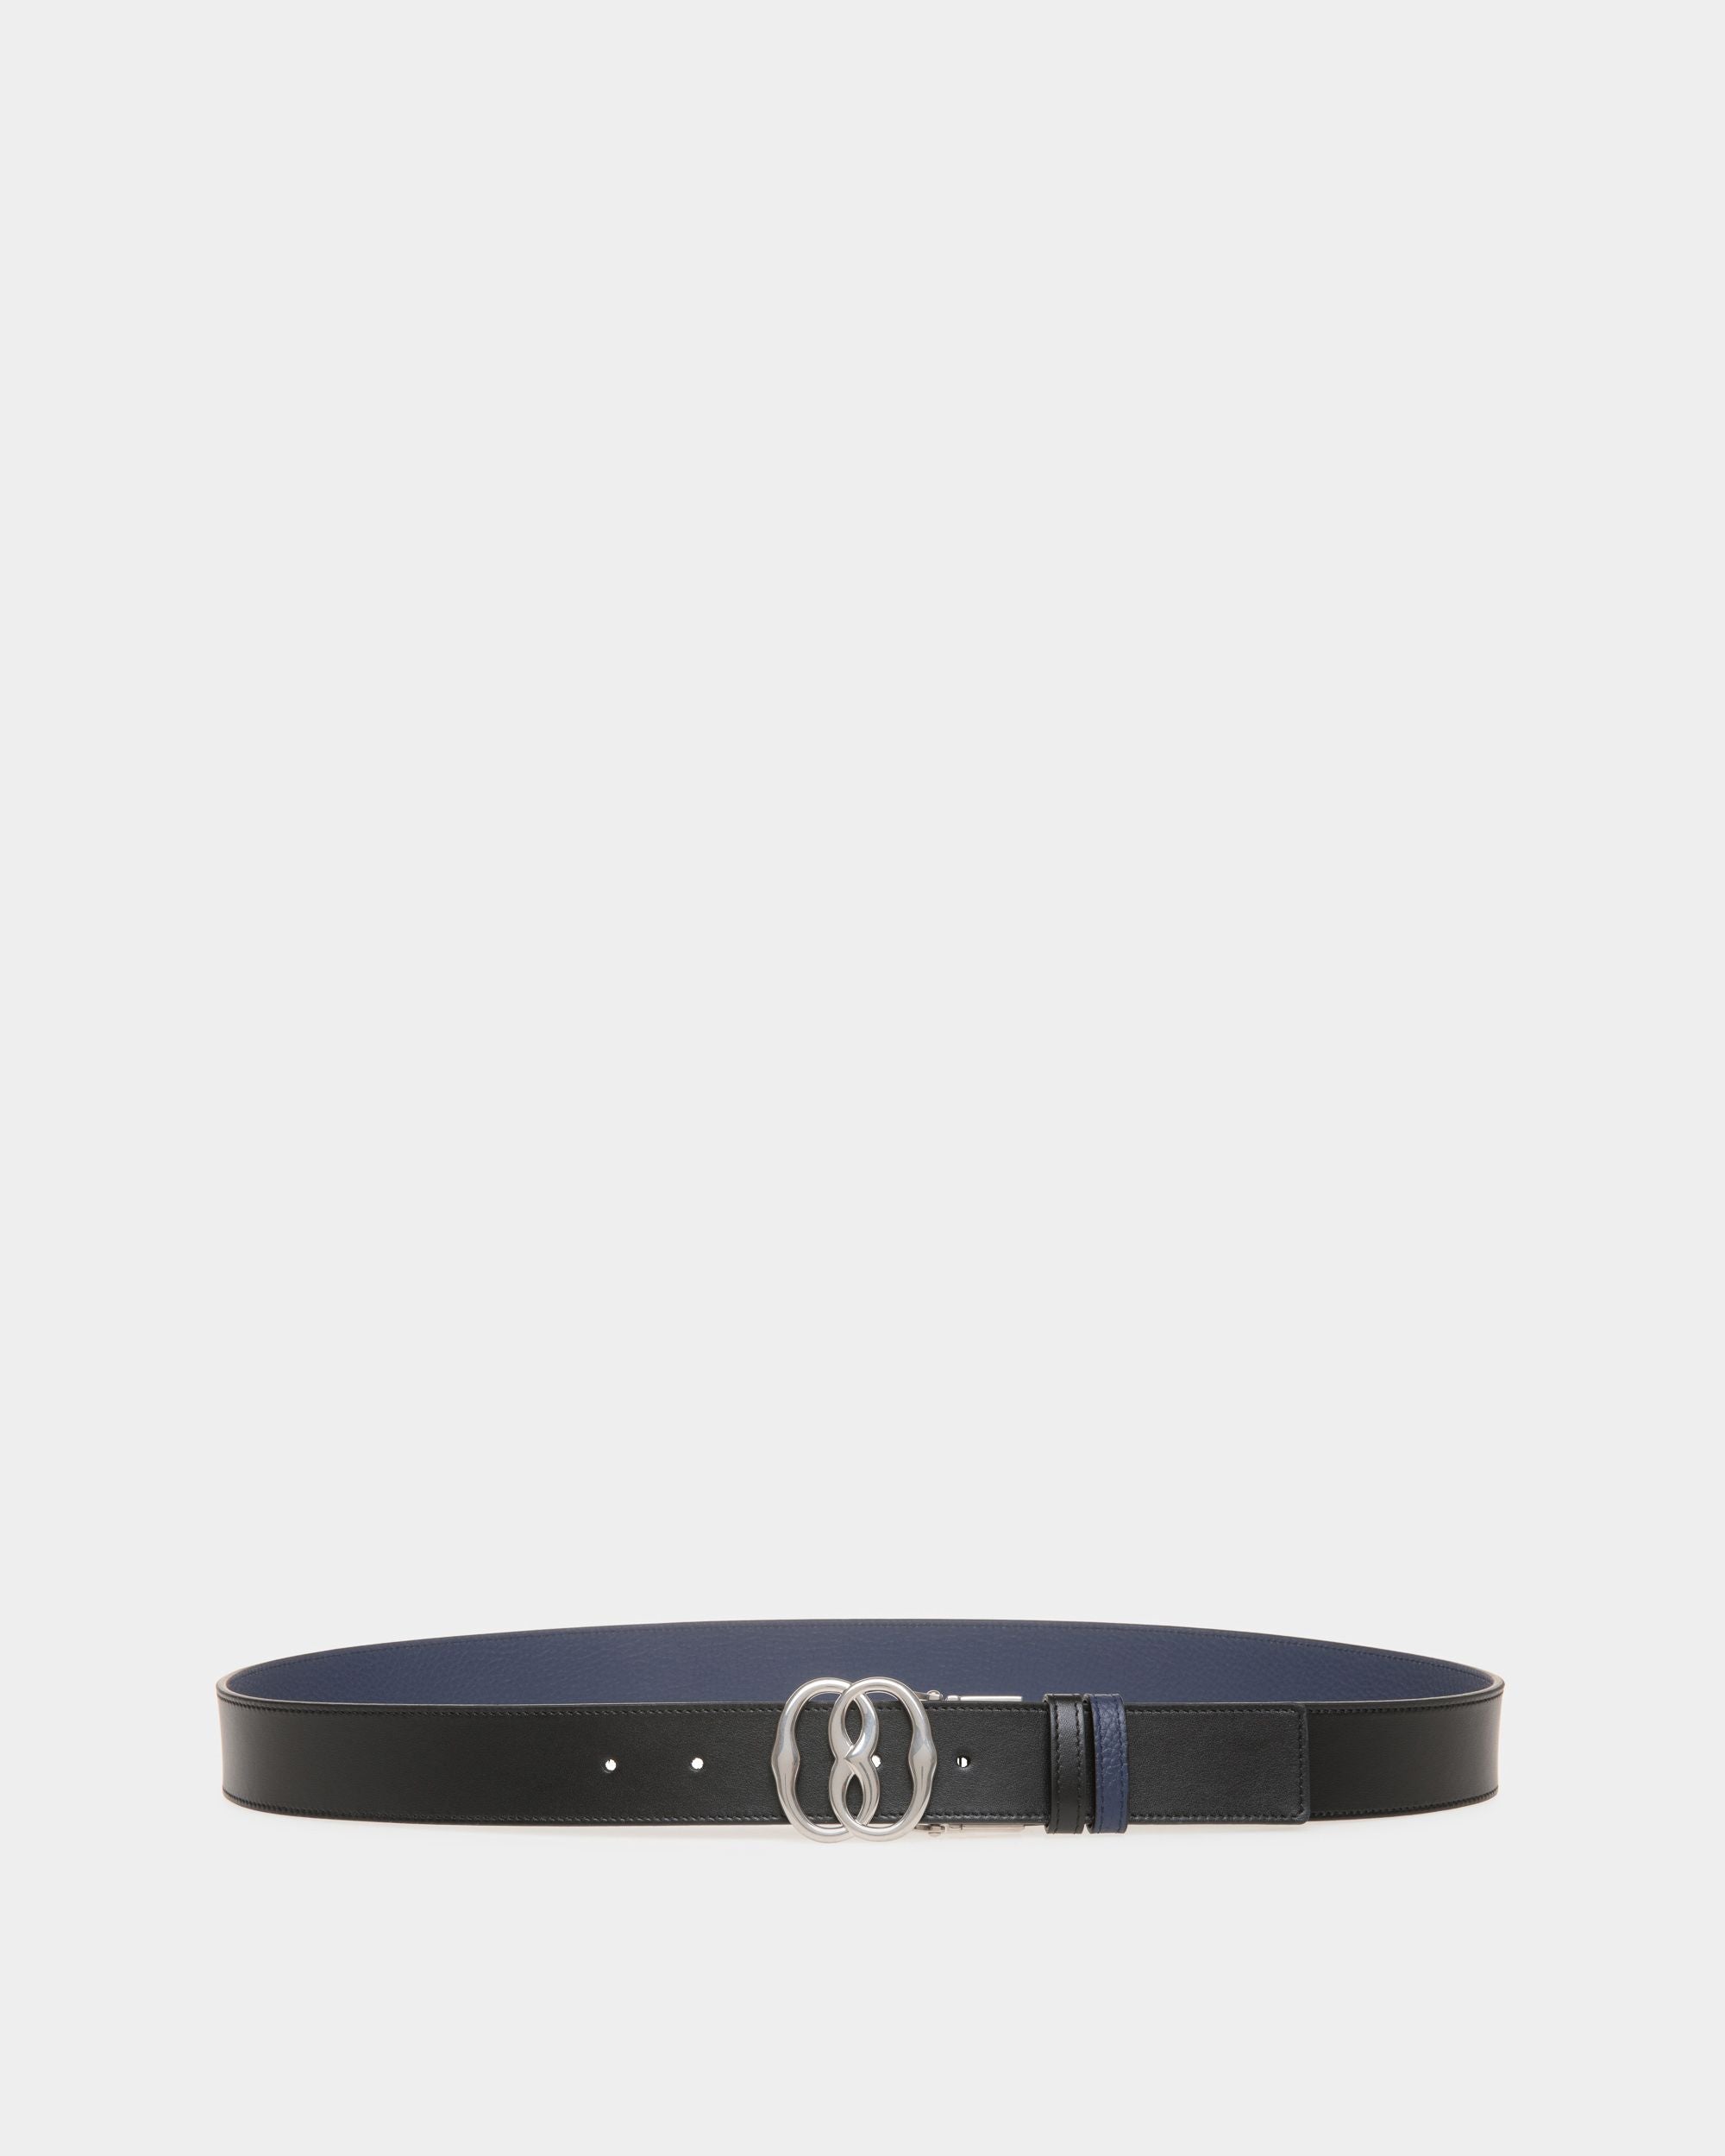 Men's Bally Iconic 35mm Belt In Black Leather | Bally | Still Life Front